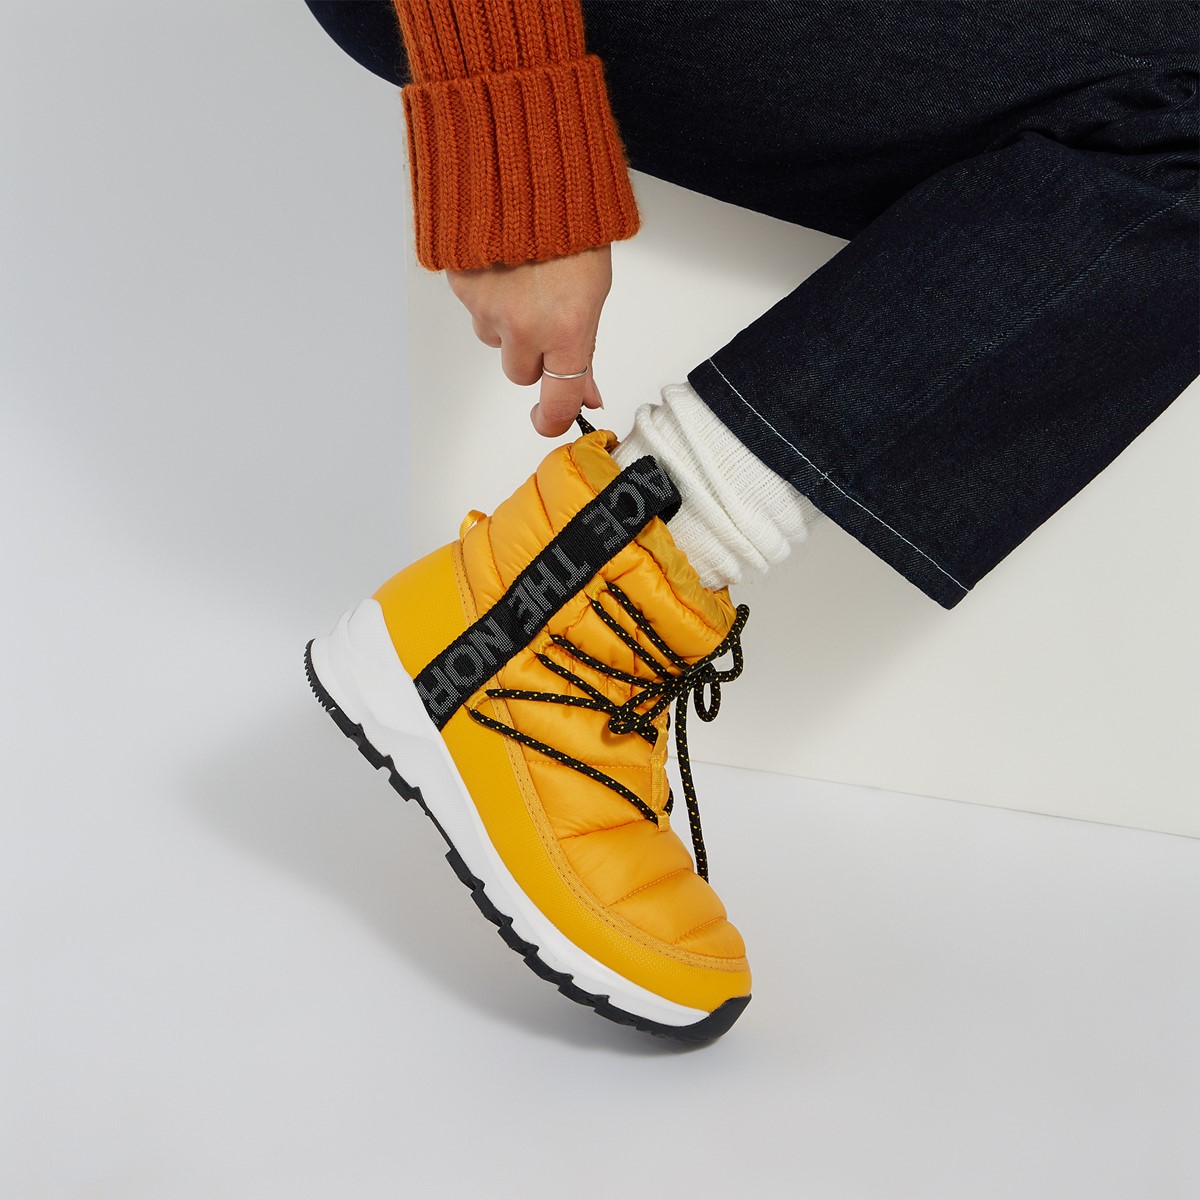 north face yellow boots